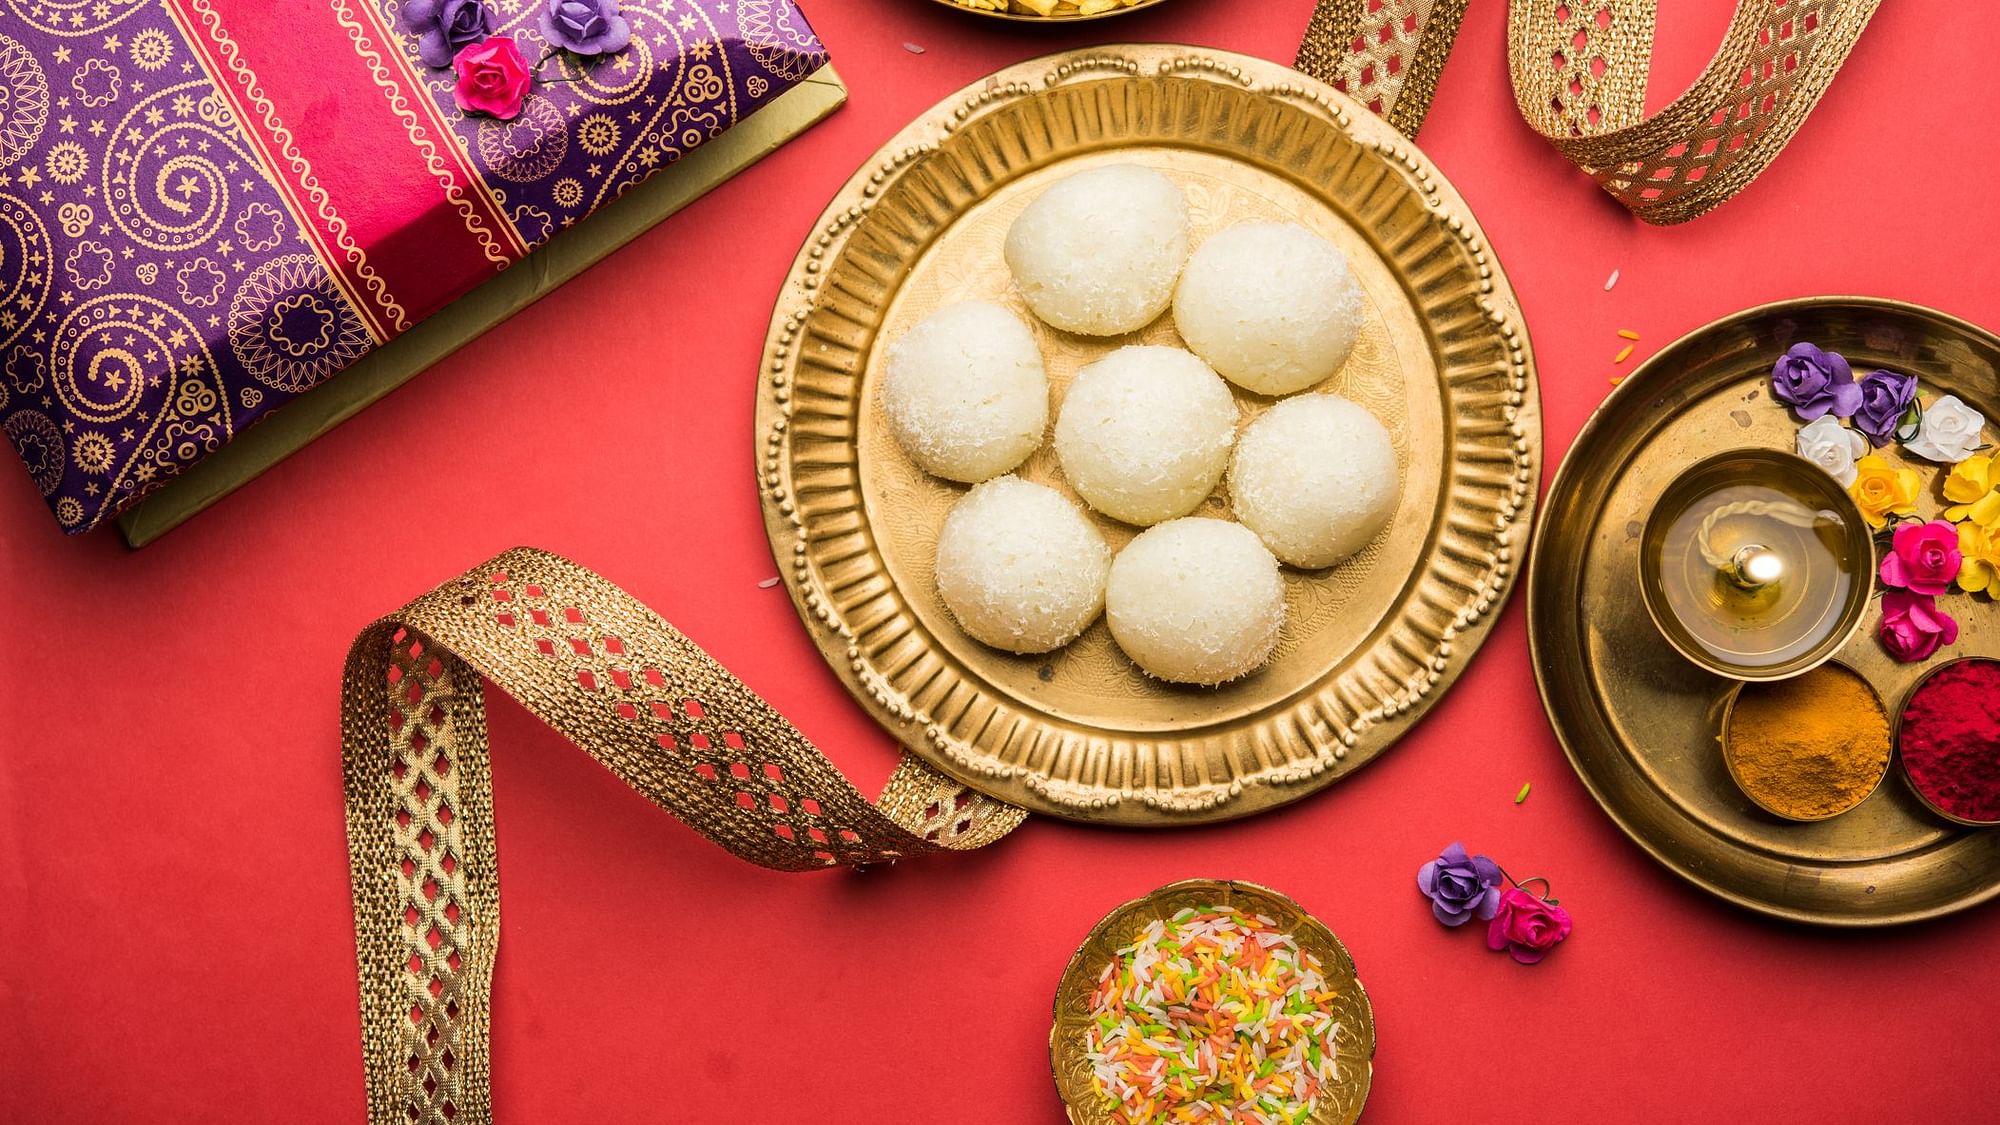 Instead of the usual packed dabbas of sweets from the store, this Diwali, gift your loved ones some homemade delights.